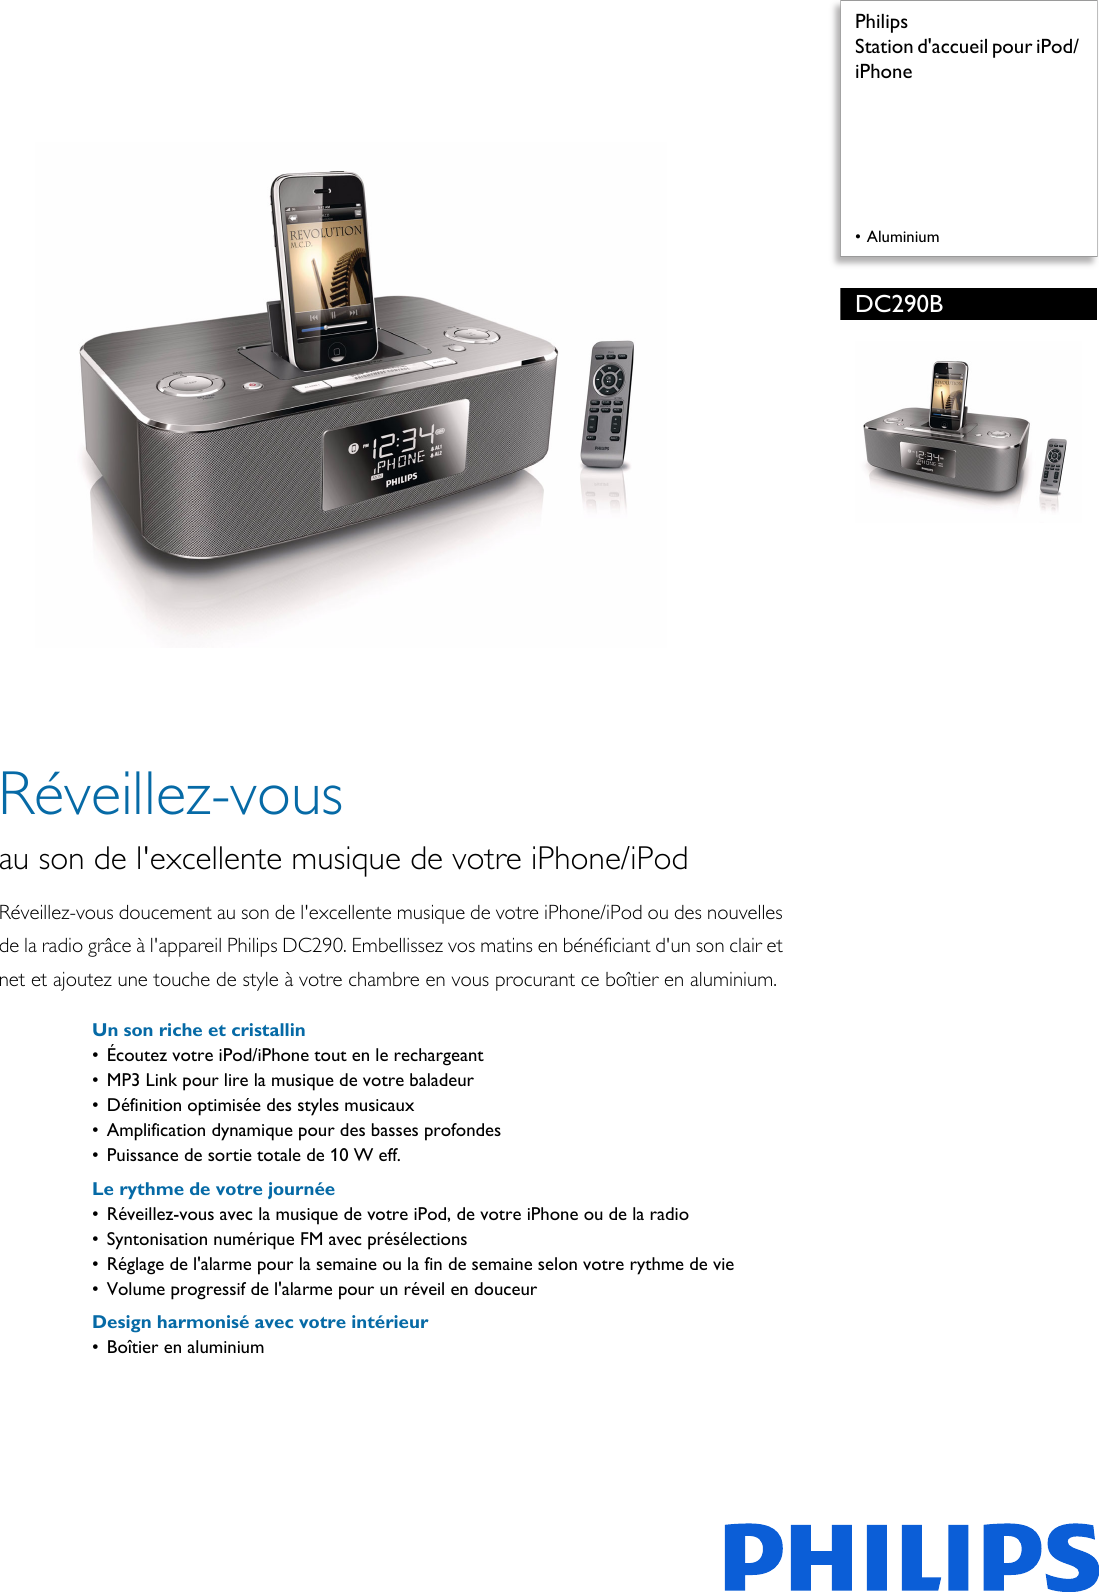 Page 1 of 3 - Philips DC290B/37 Station D'accueil Pour IPod/ IPhone User Manual Dépliant Dc290b 37 Pss Cfrca